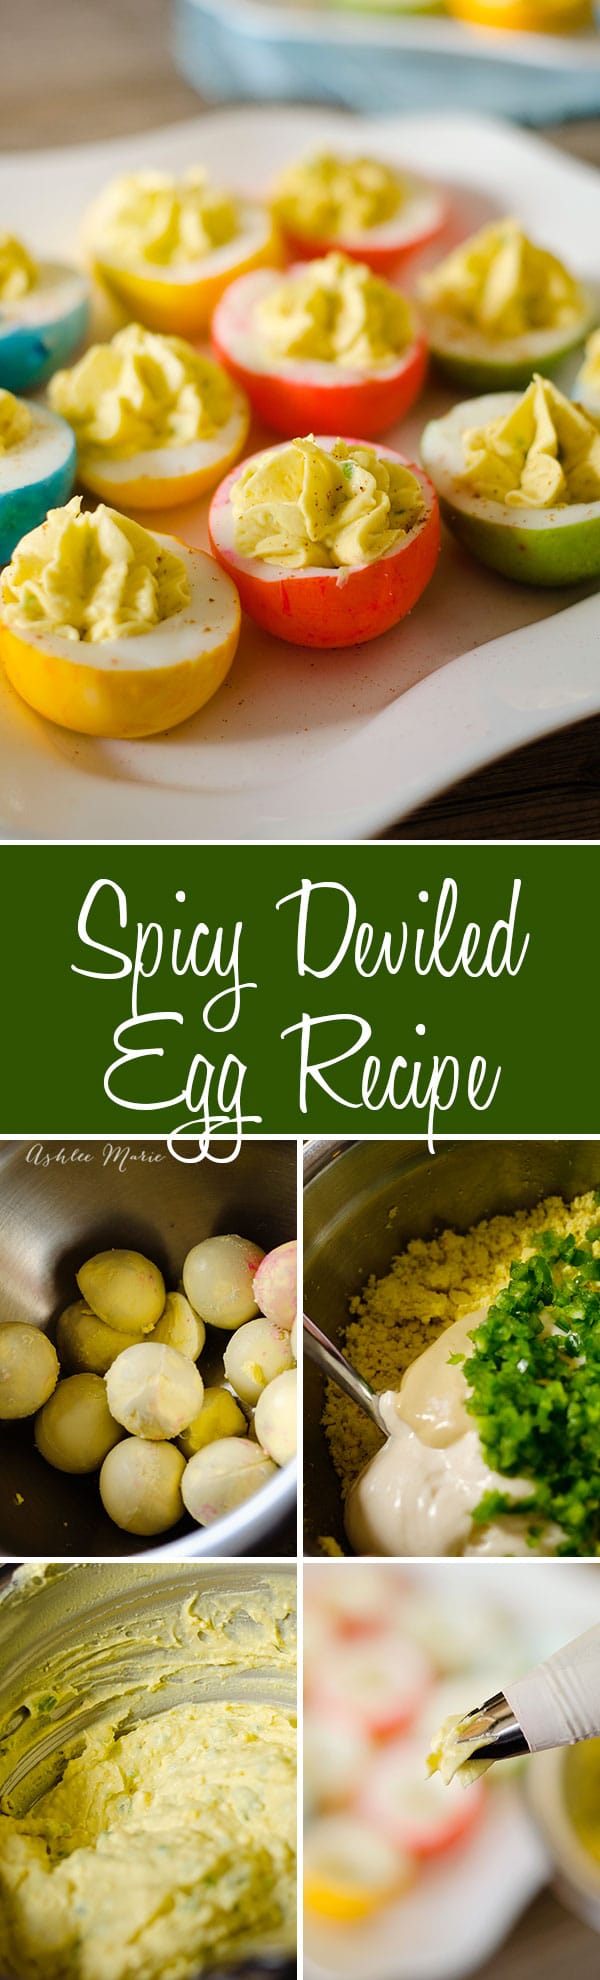 recipe for spicy deviled eggs, even my kids love this recipe